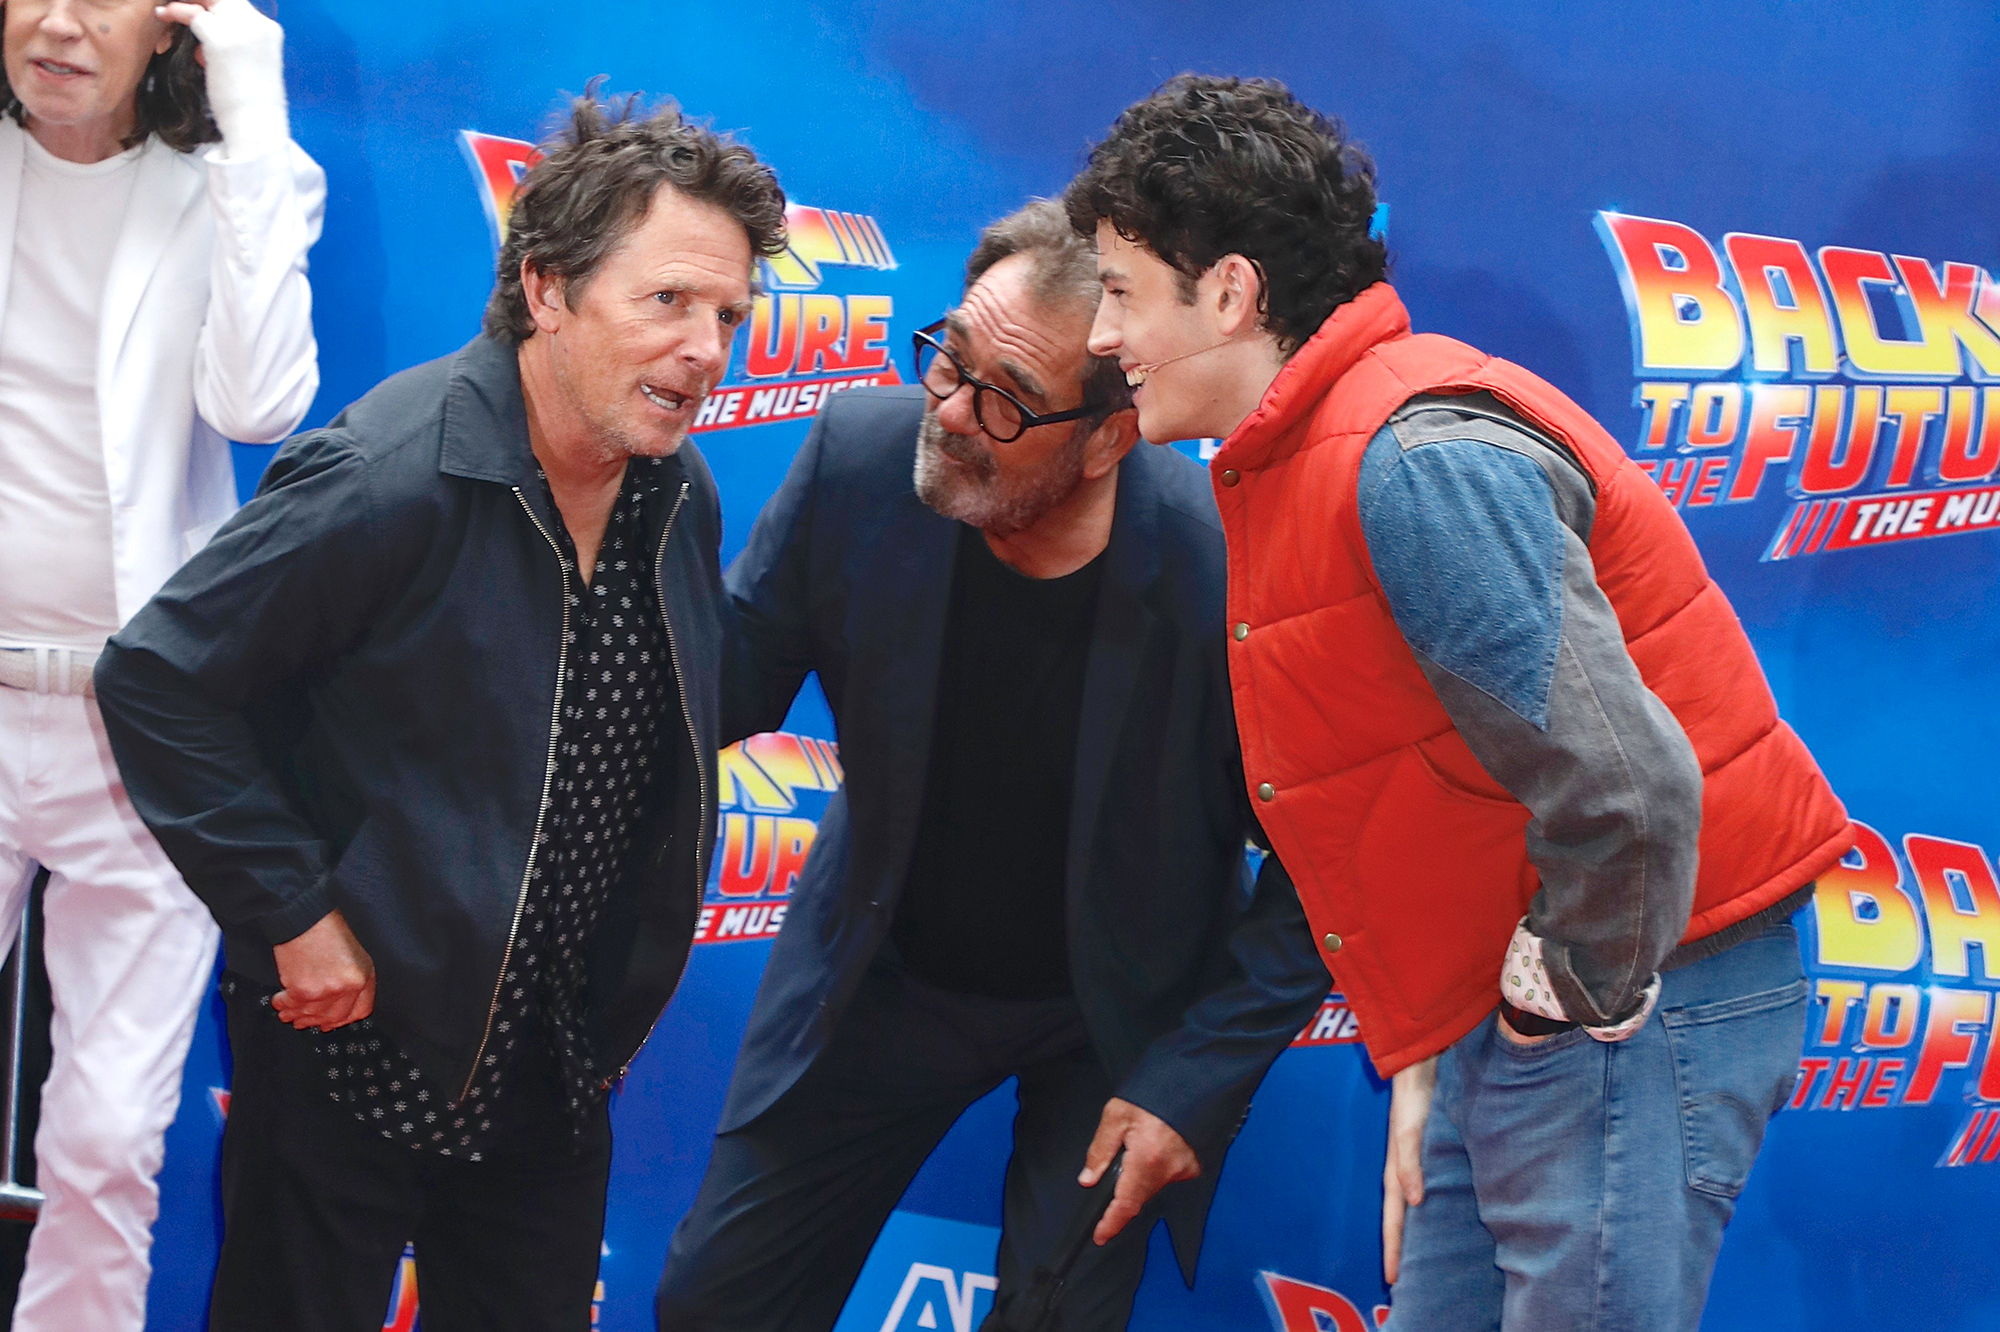 Back to the Future' film cast reunites at gala for Broadway